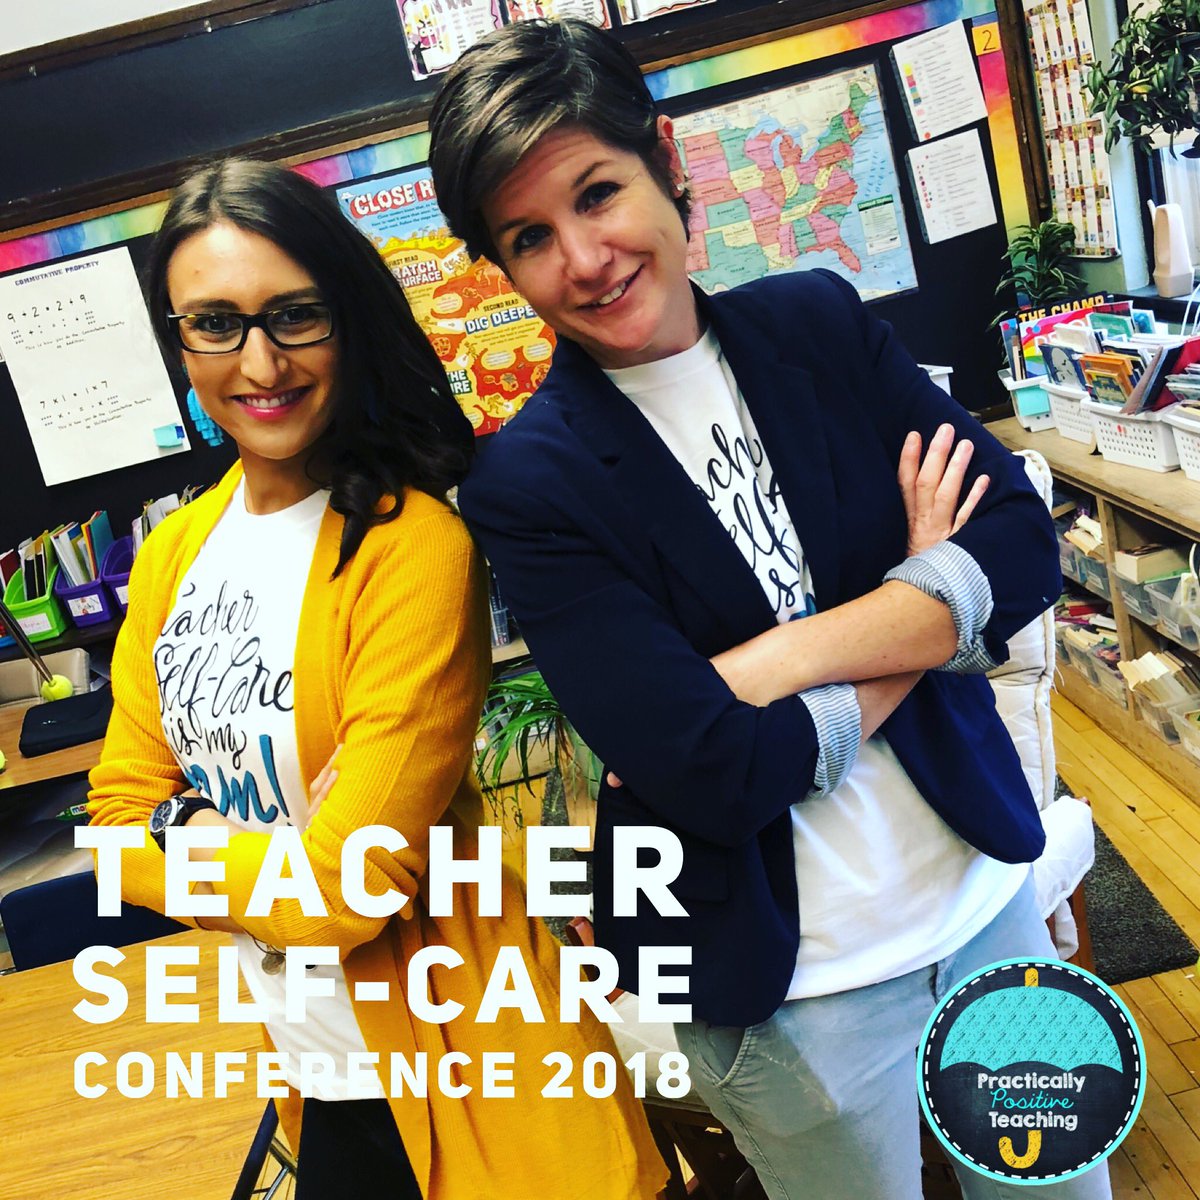 Set and ready to go! It’s time to get our self-care on! @teacherselfcare 
#selfcareCHI 
#selfcare18 #chicagoteachers #iteachtoo #teachersofig #highfive #stopcomparingyourself #startdoing #beproudofyourself #bewhoyouare #conferencesession #iteach5th #iteach4th